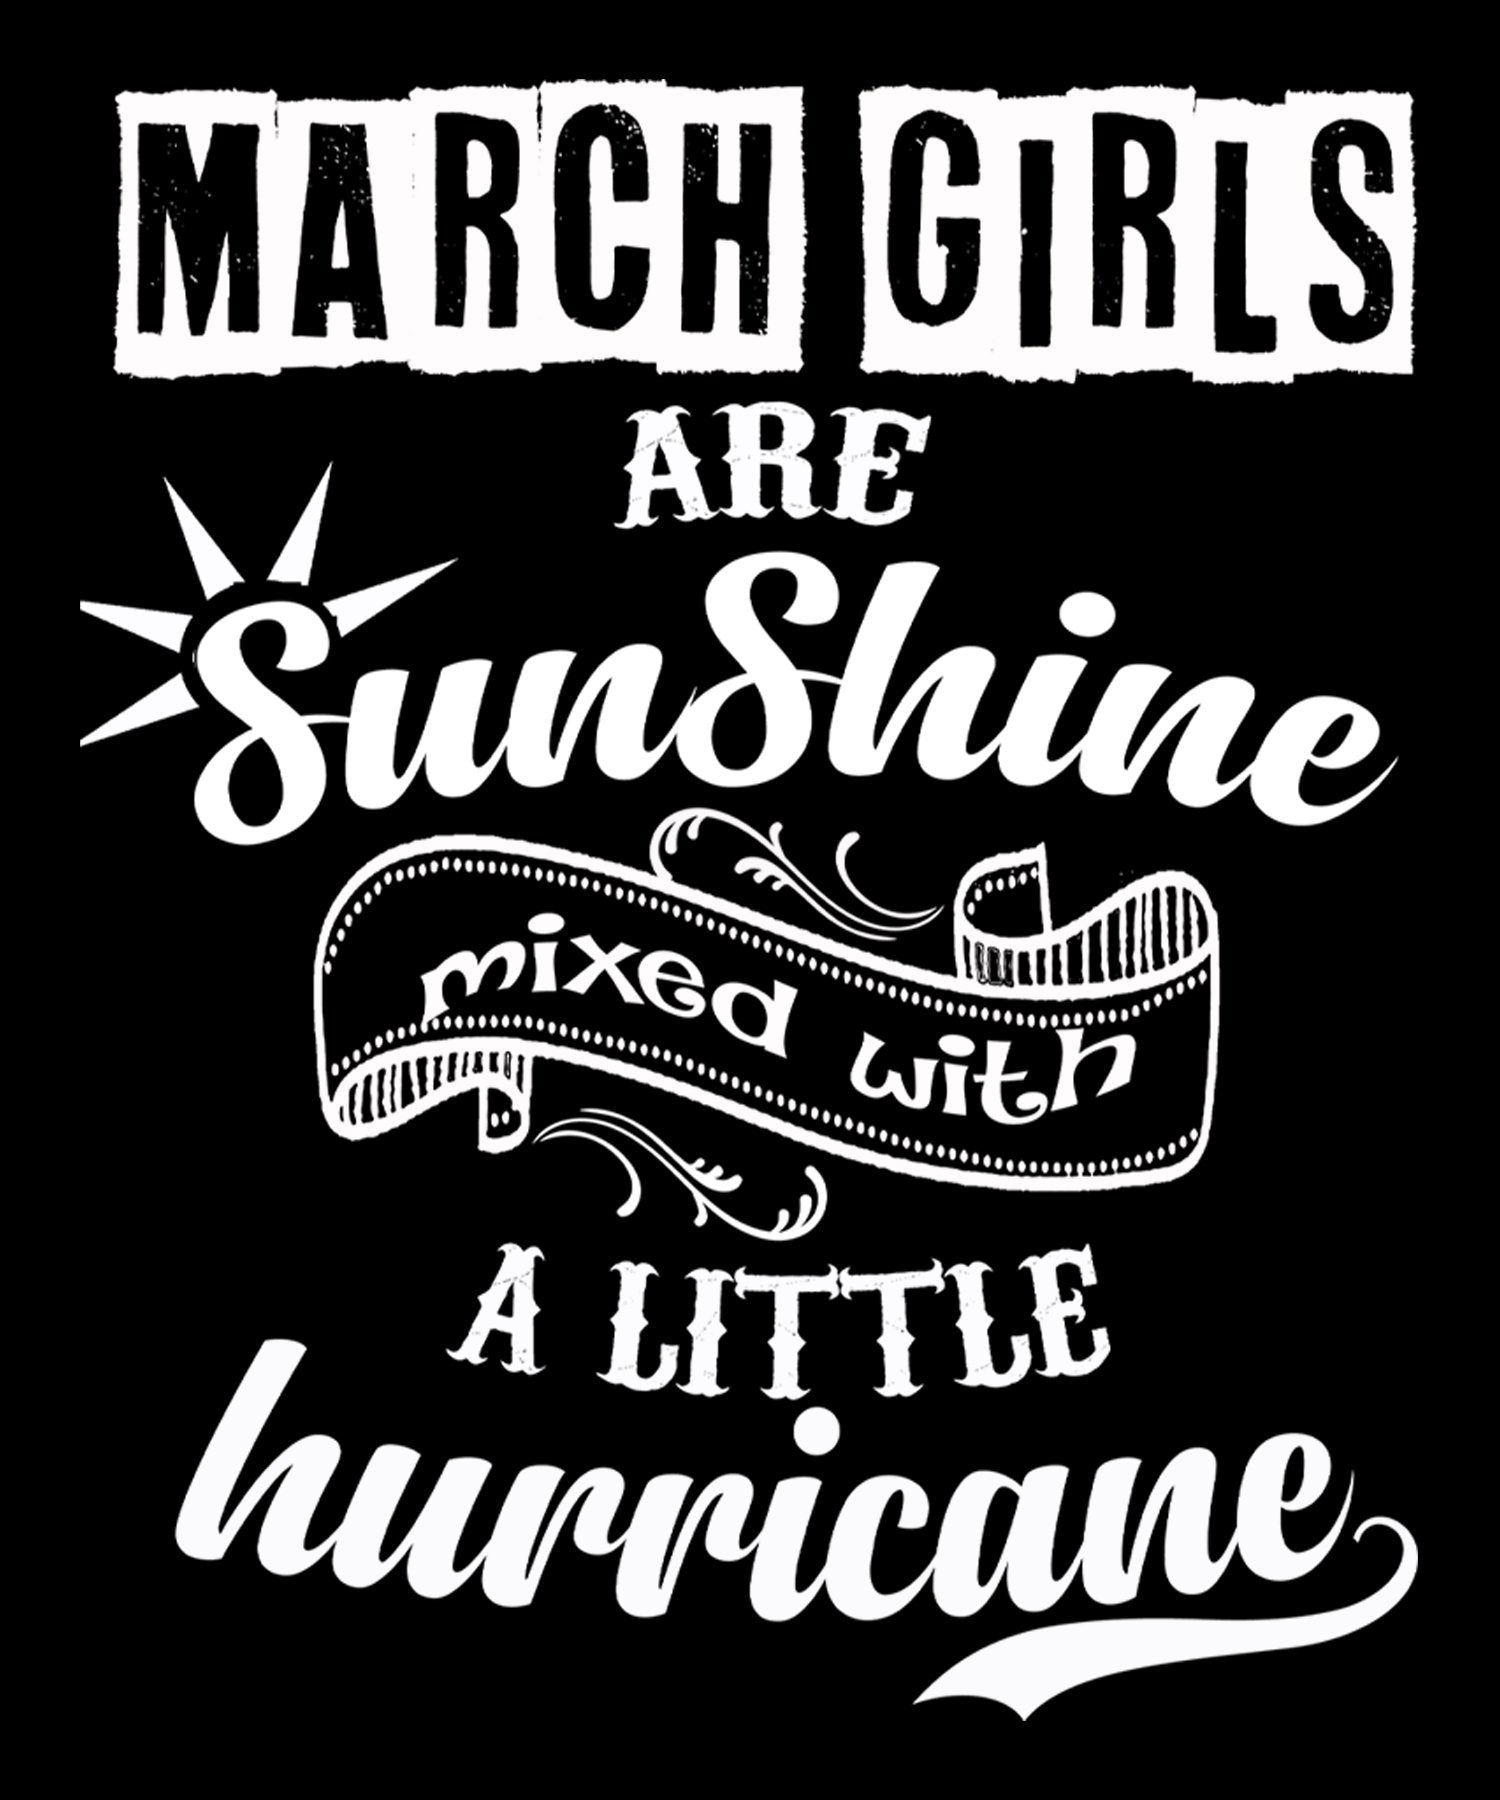 "March Girls Are Sunshine Mixed With Hurricane"